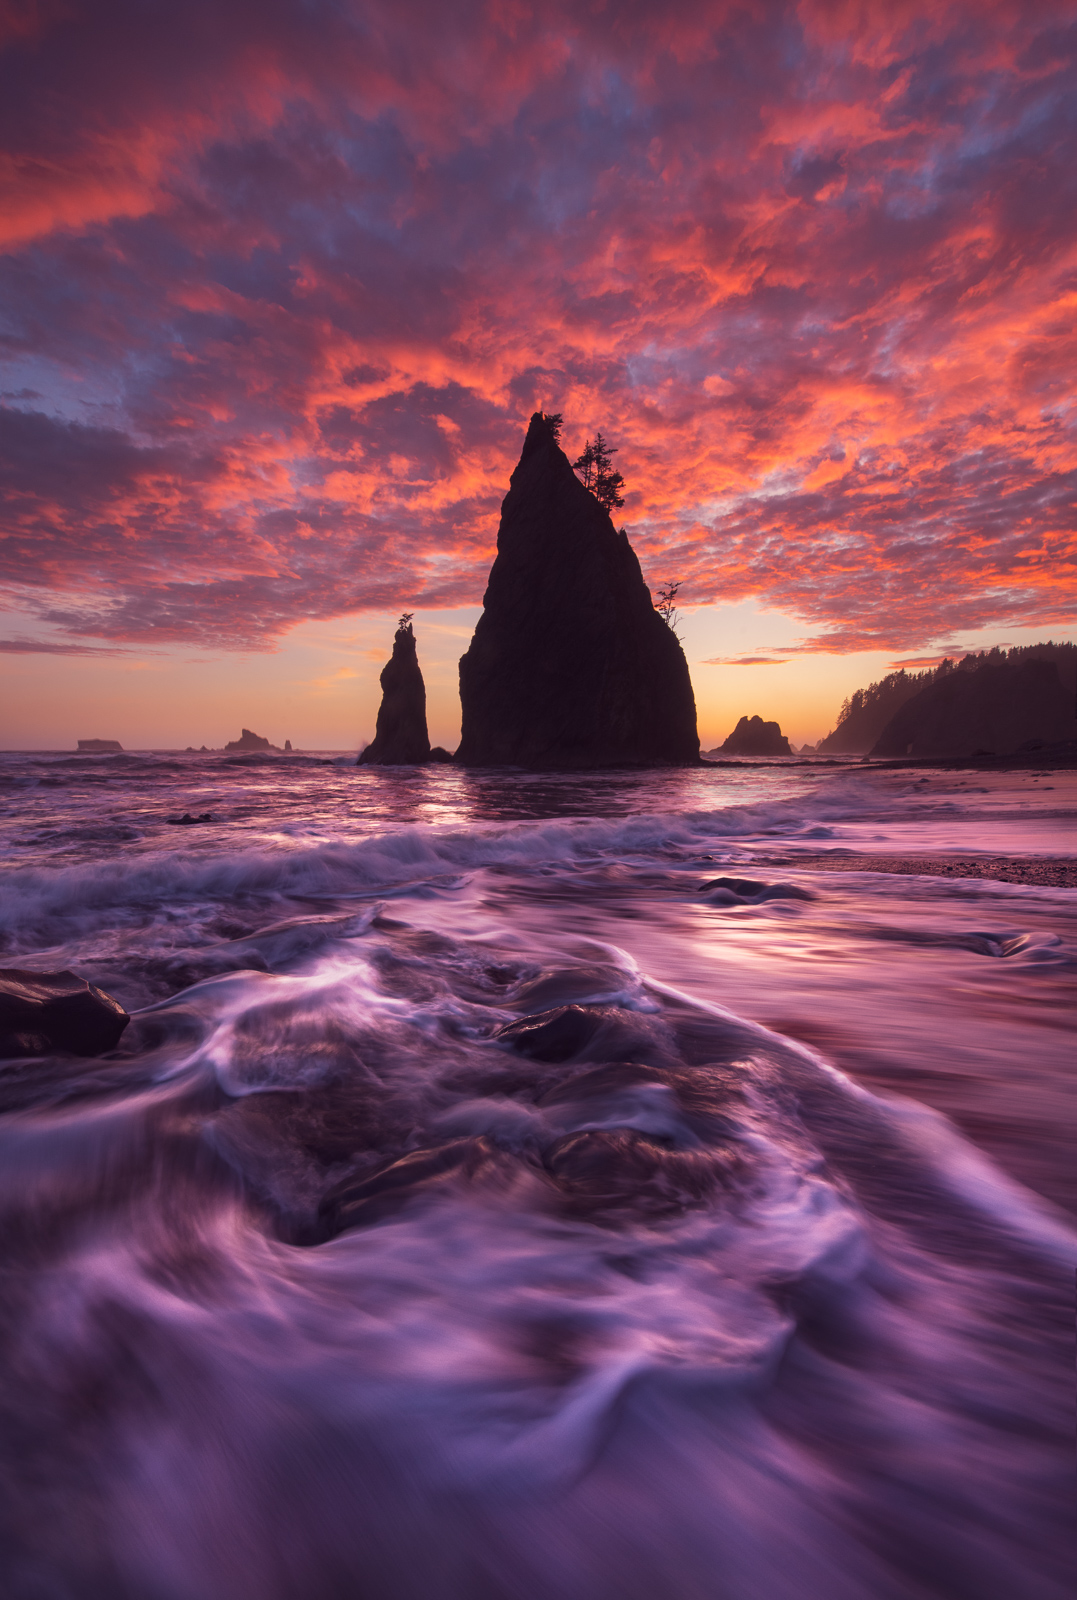 A dramatic and colorful sunset at Rialto Beach.